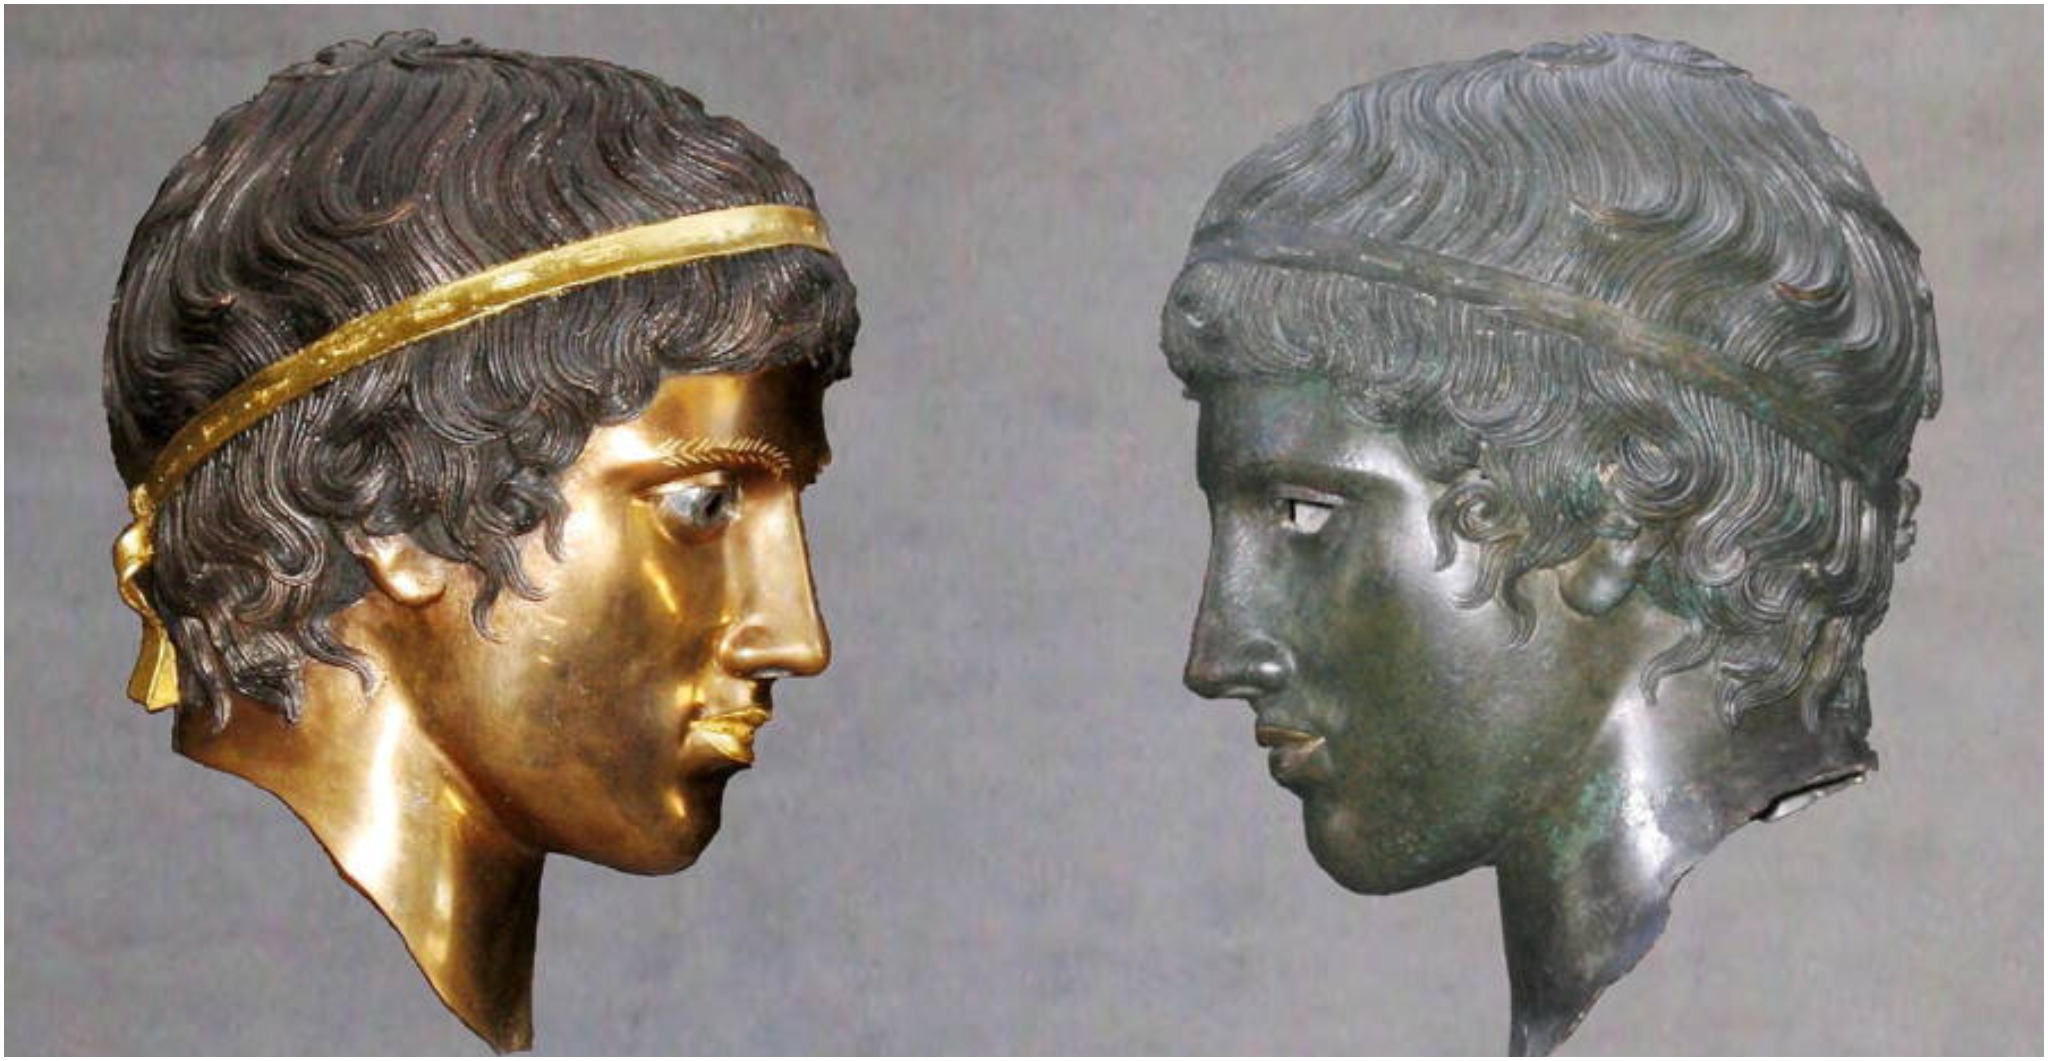 A bronze head, called Glyptothek Munich 457, with and without patina. Photo: MatthiasKabel CC by 3.0